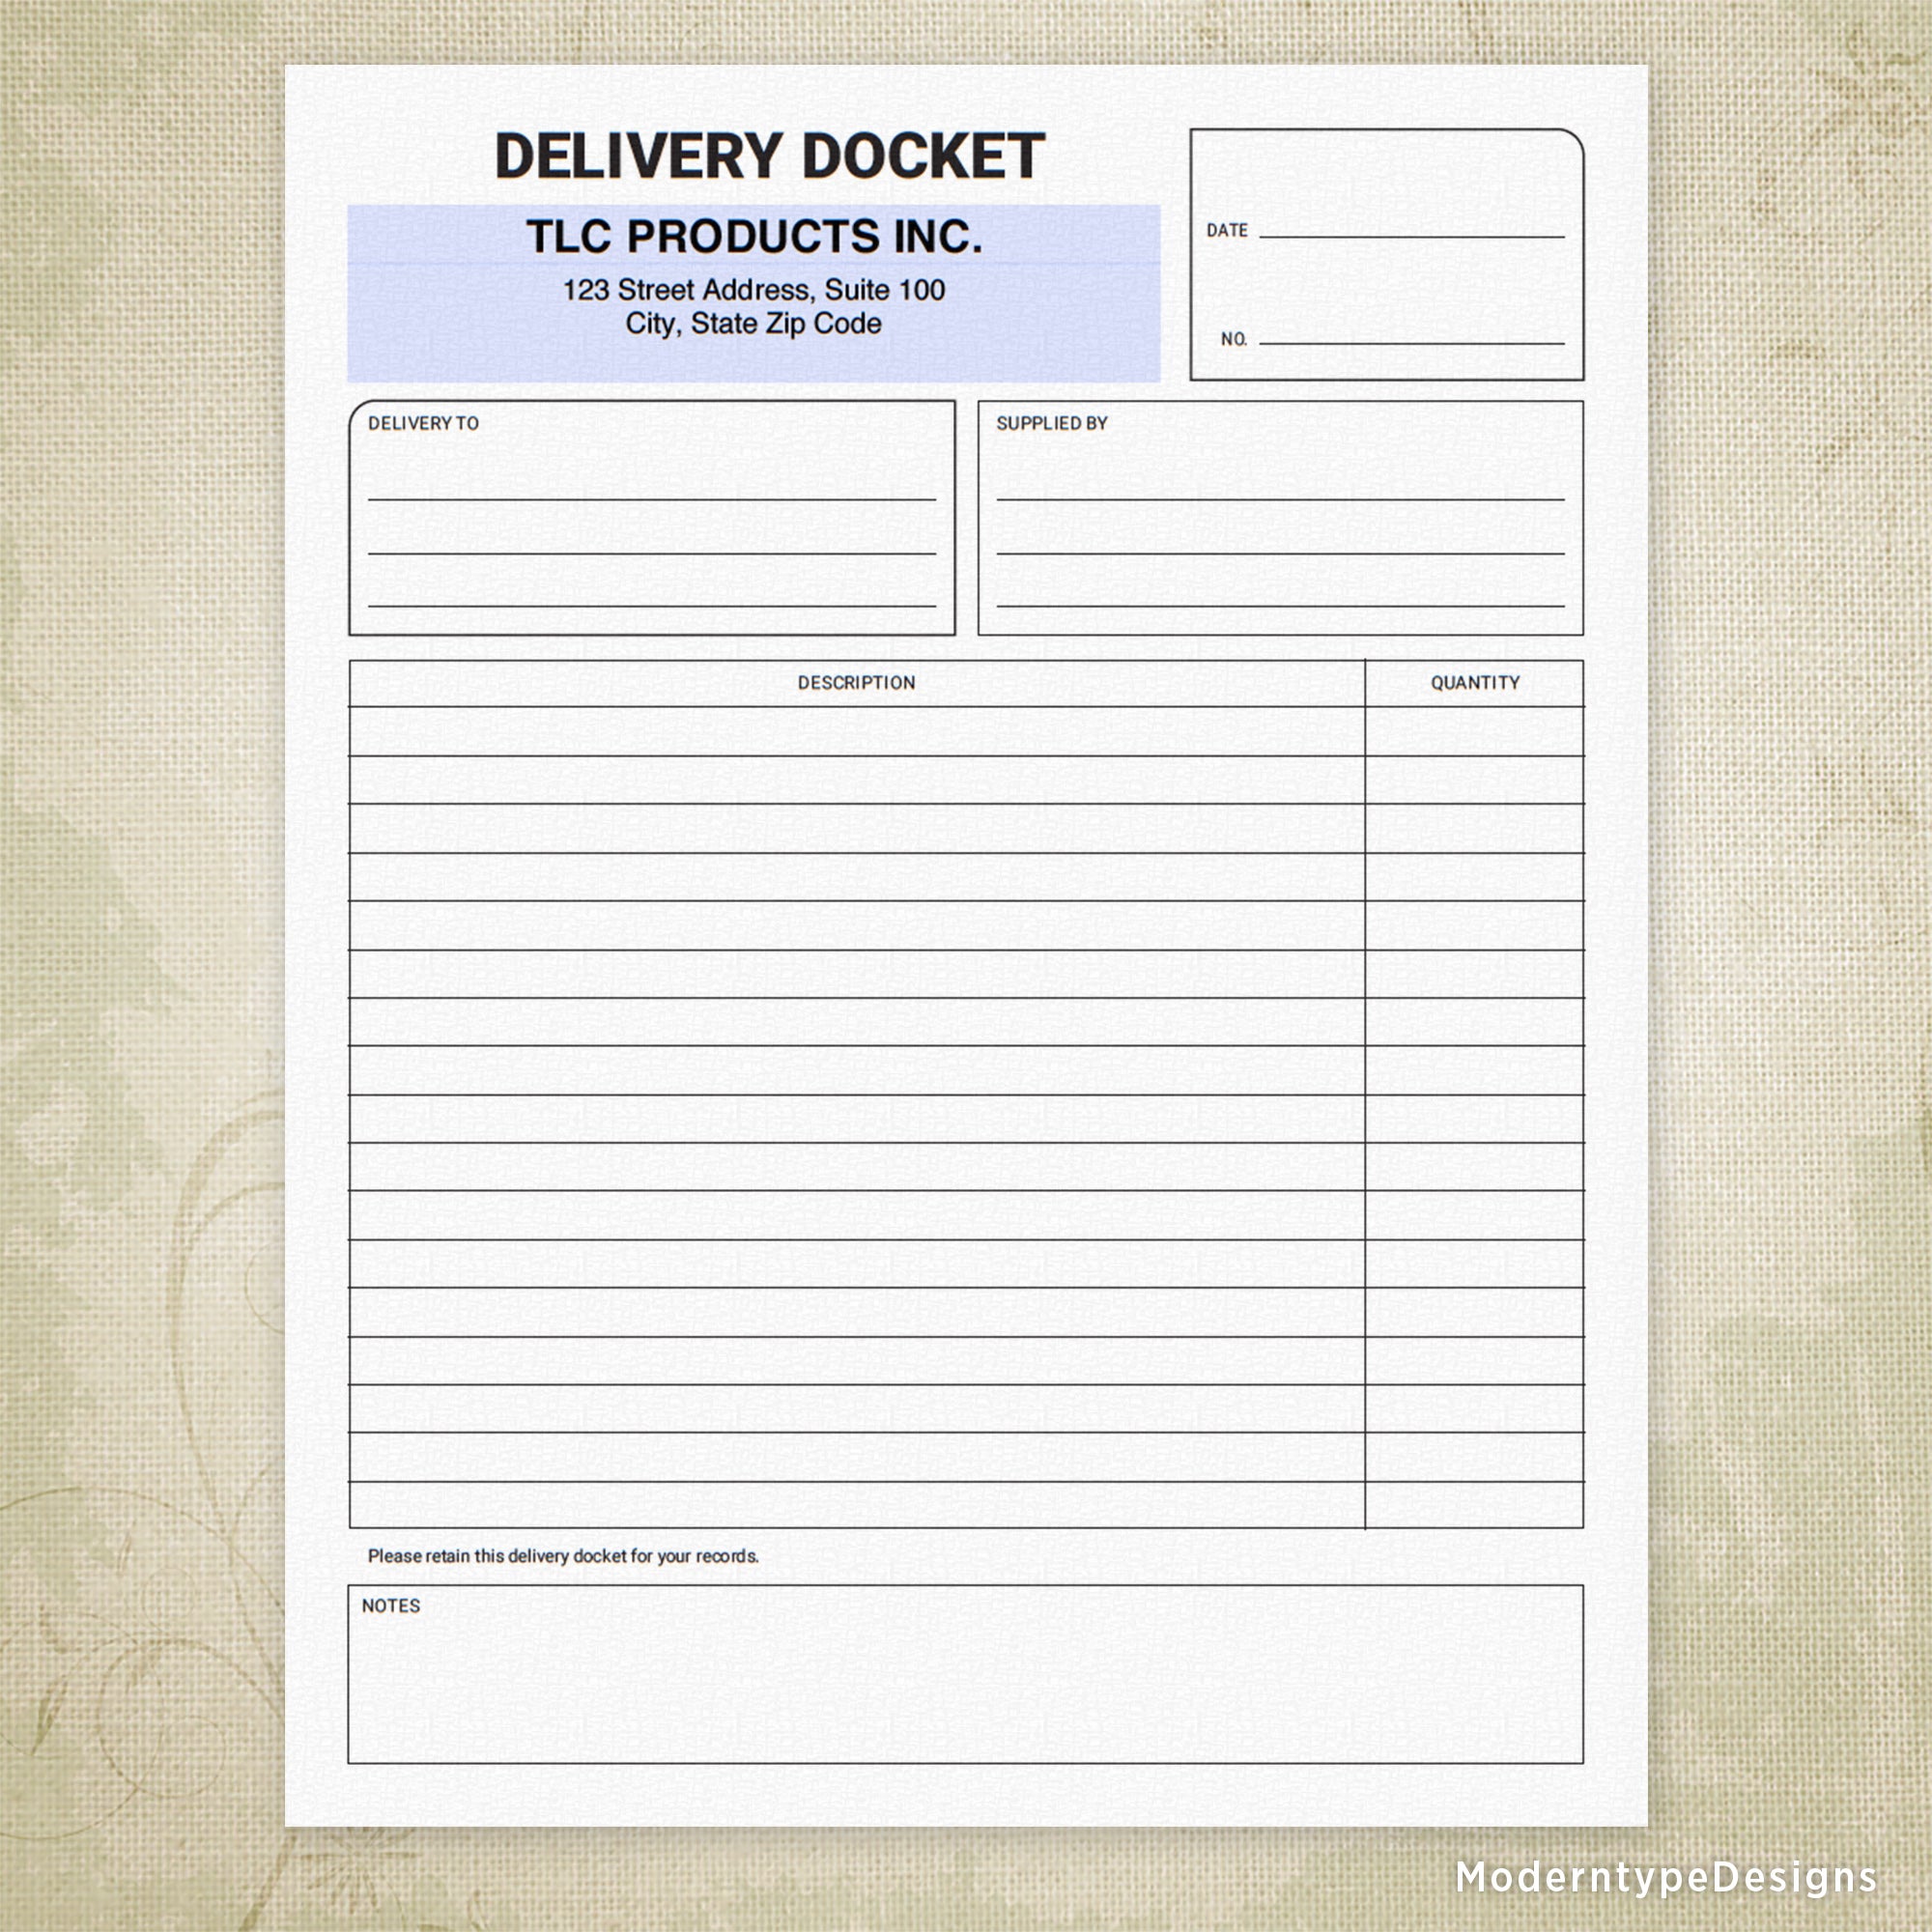 Shipping Note Form ≡ Fill Out Printable PDF Forms Online